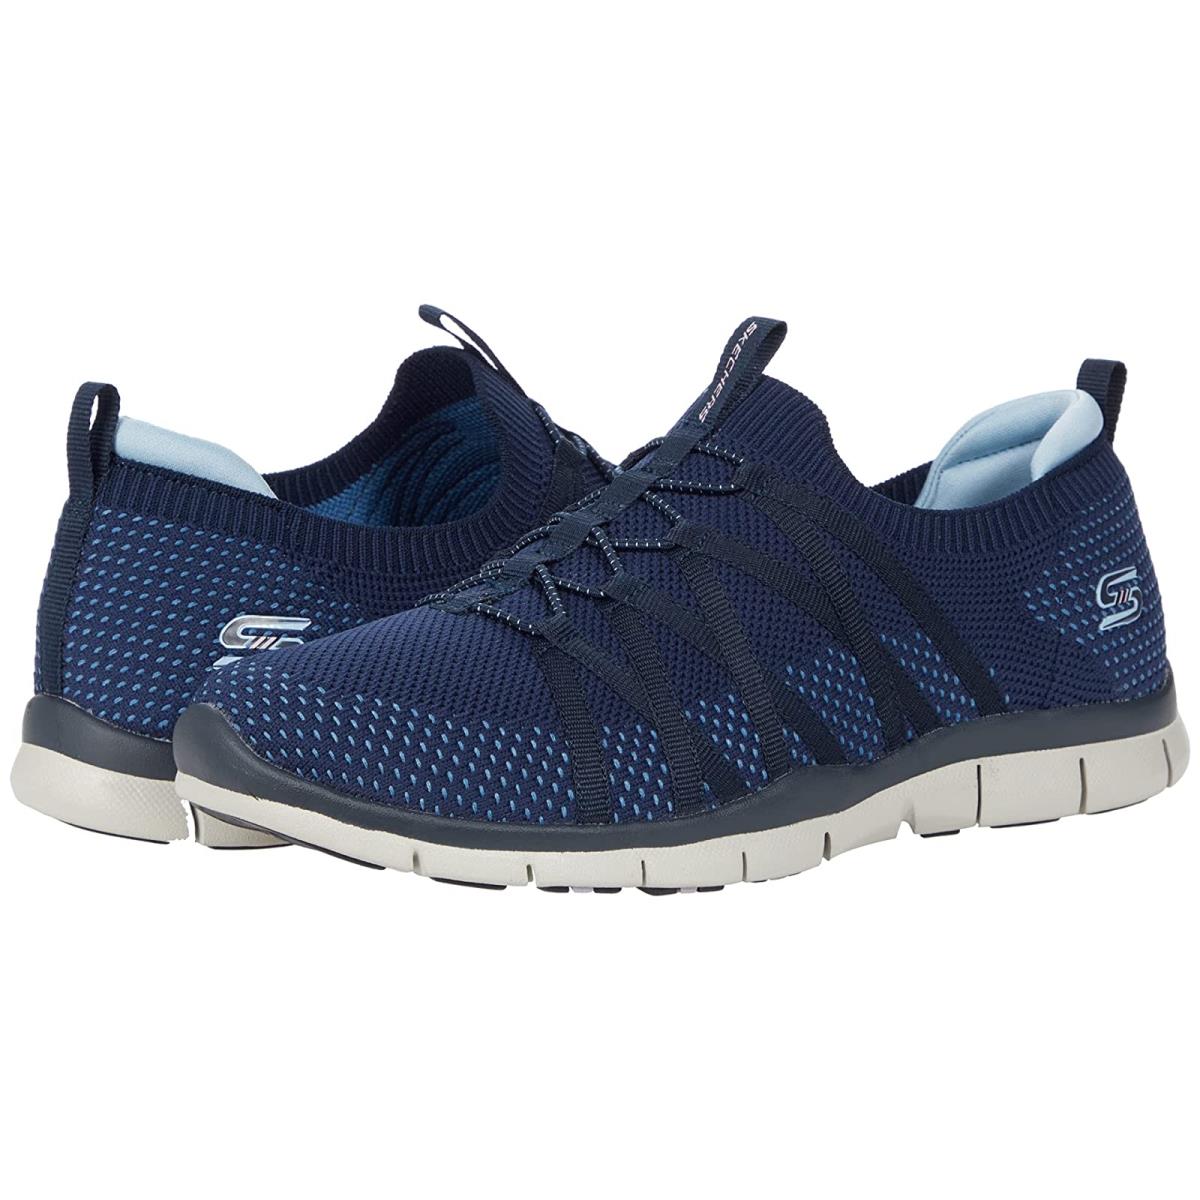 Woman`s Sneakers Athletic Shoes Skechers Gratis - Chic Newness Navy